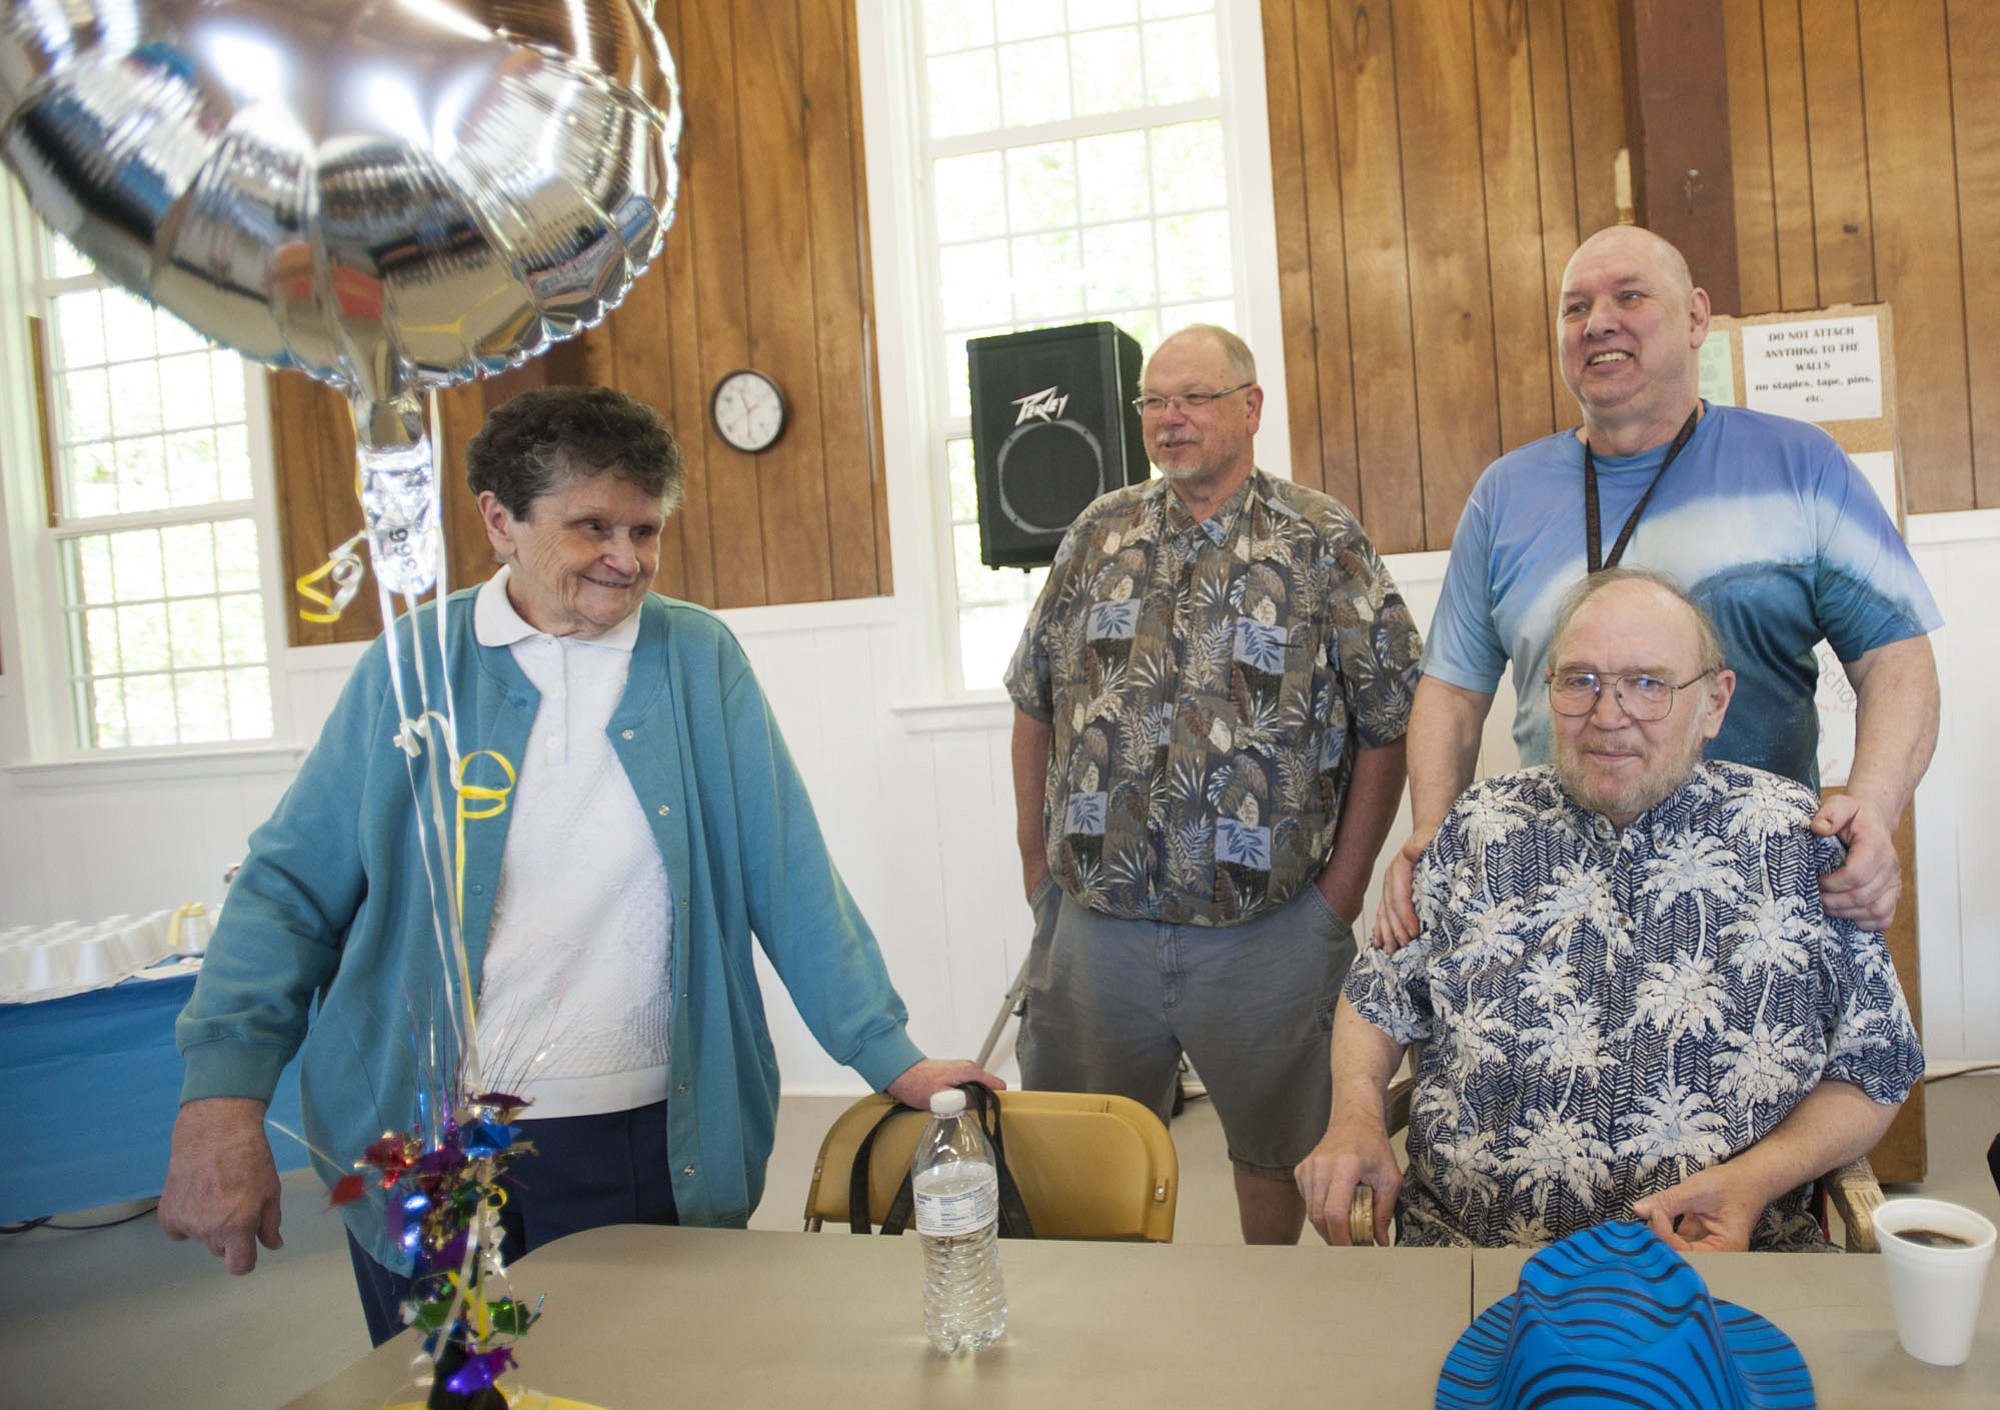 The outreach team at Memorial Lutheran Church holds a retirement tribute to Gary Schonberger, right, in mid-April. Schonberger has stepped down as the leader of the church's food ministry and daily soup kitchen.